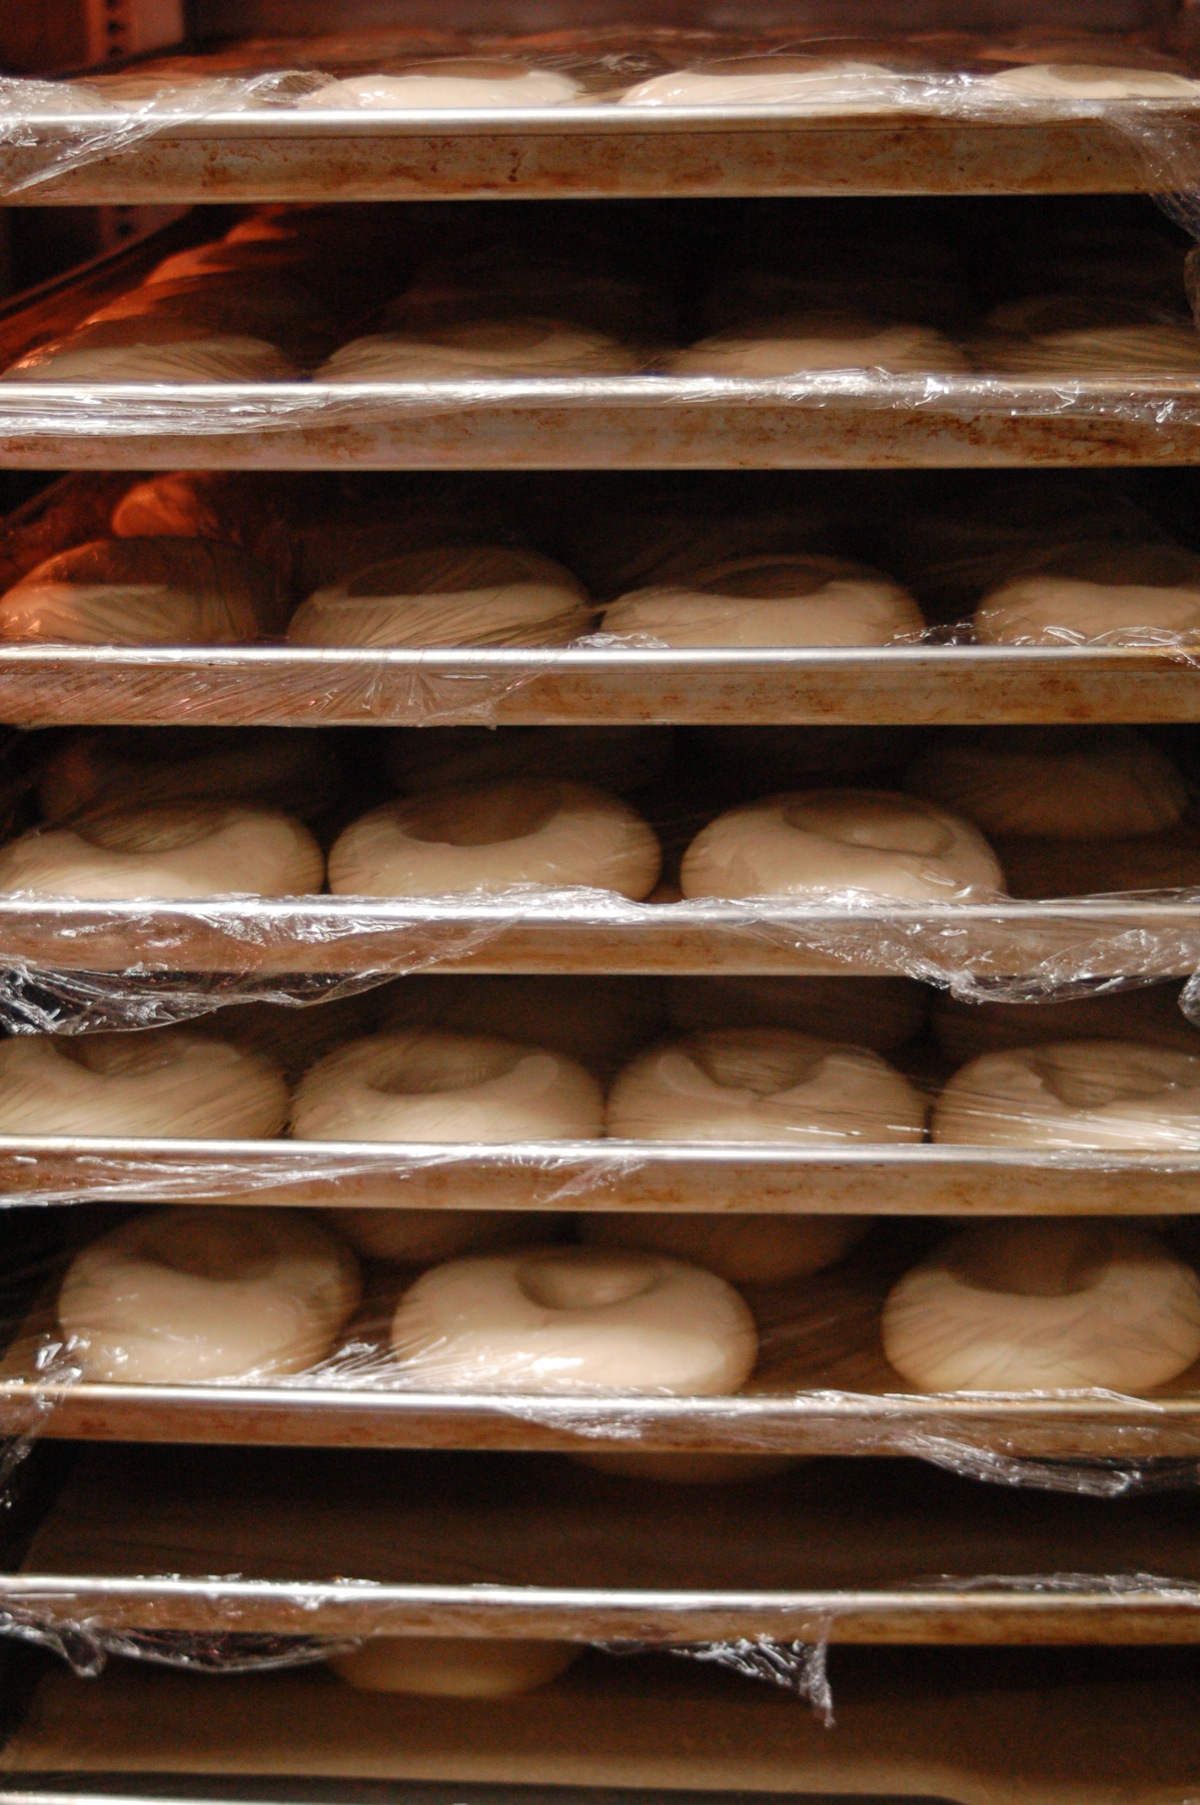 Racks of bagels sit in the refrigerator during the retarding process. After cooling overnight, the bagels will be baked the next day. “That’s how the bagel becomes a chewy thing. That’s what differentiates it from dough with a hole in it,” said Mikela Aramburu, co-owner of The Bagel Shop.